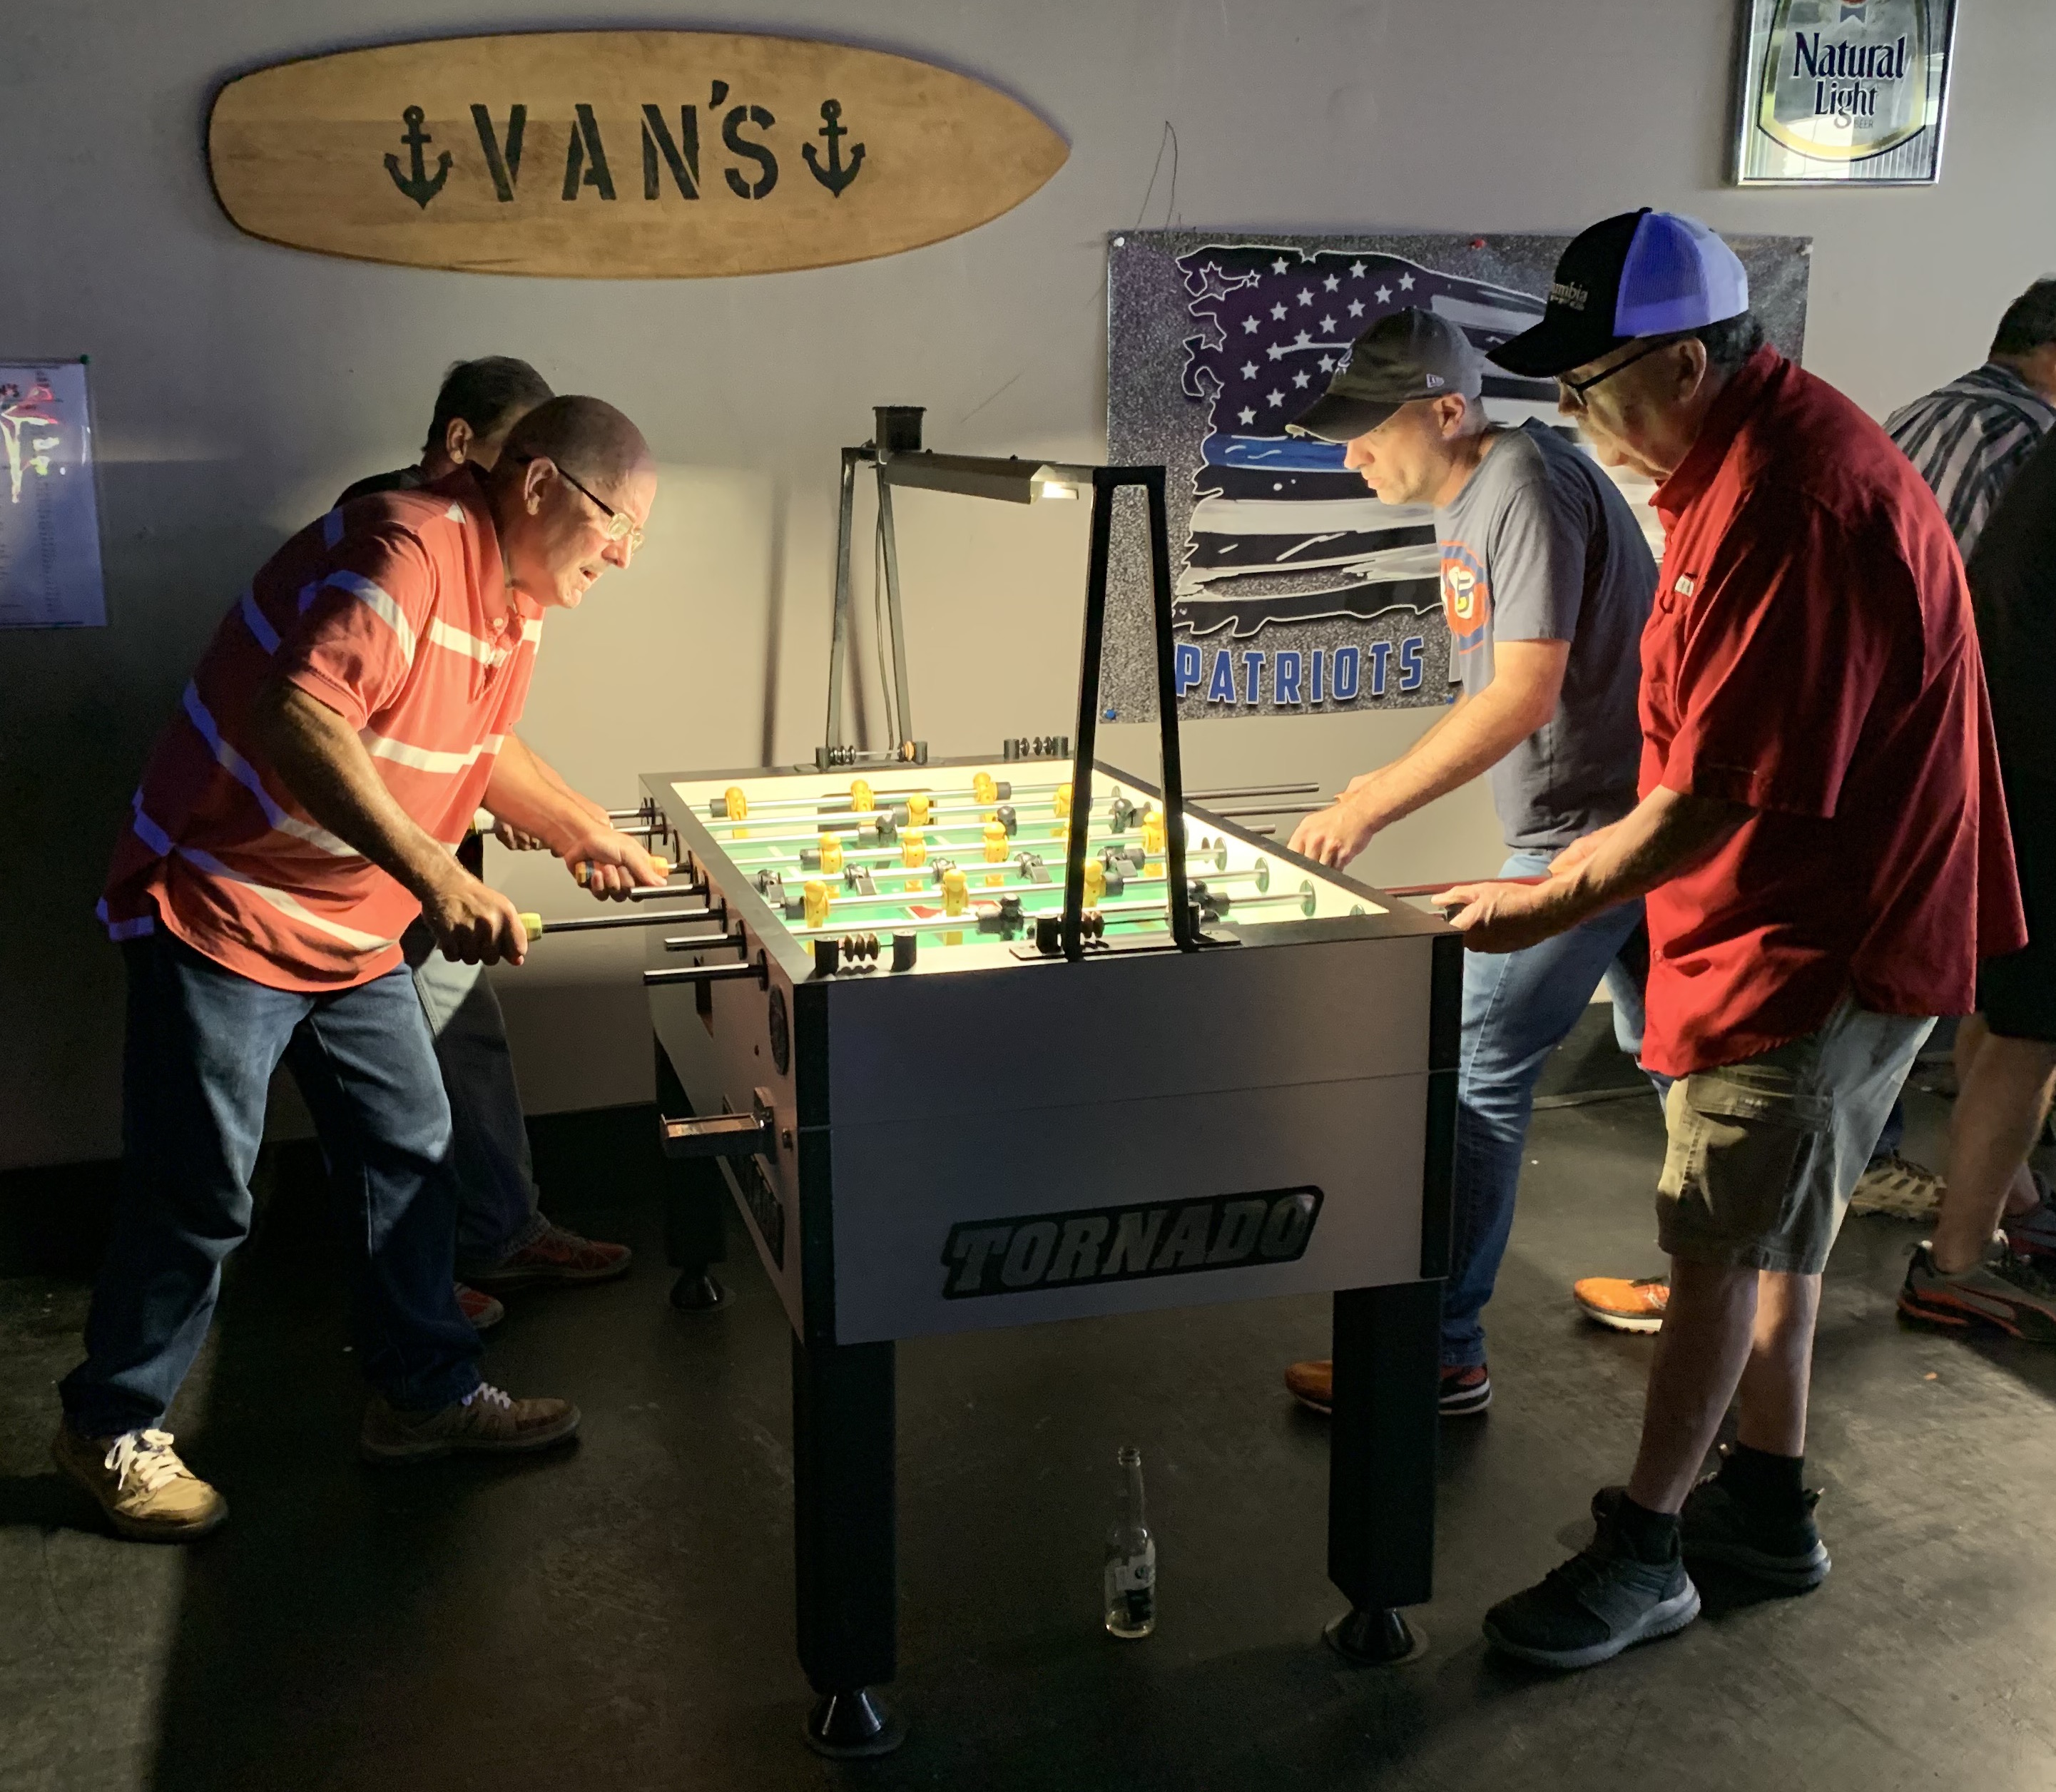 Open DYP foosball action at Van's Bar in Leeds,AL. with Tony Orr shown on the left competing in a match vs Jon Martin & Terry Lamb.